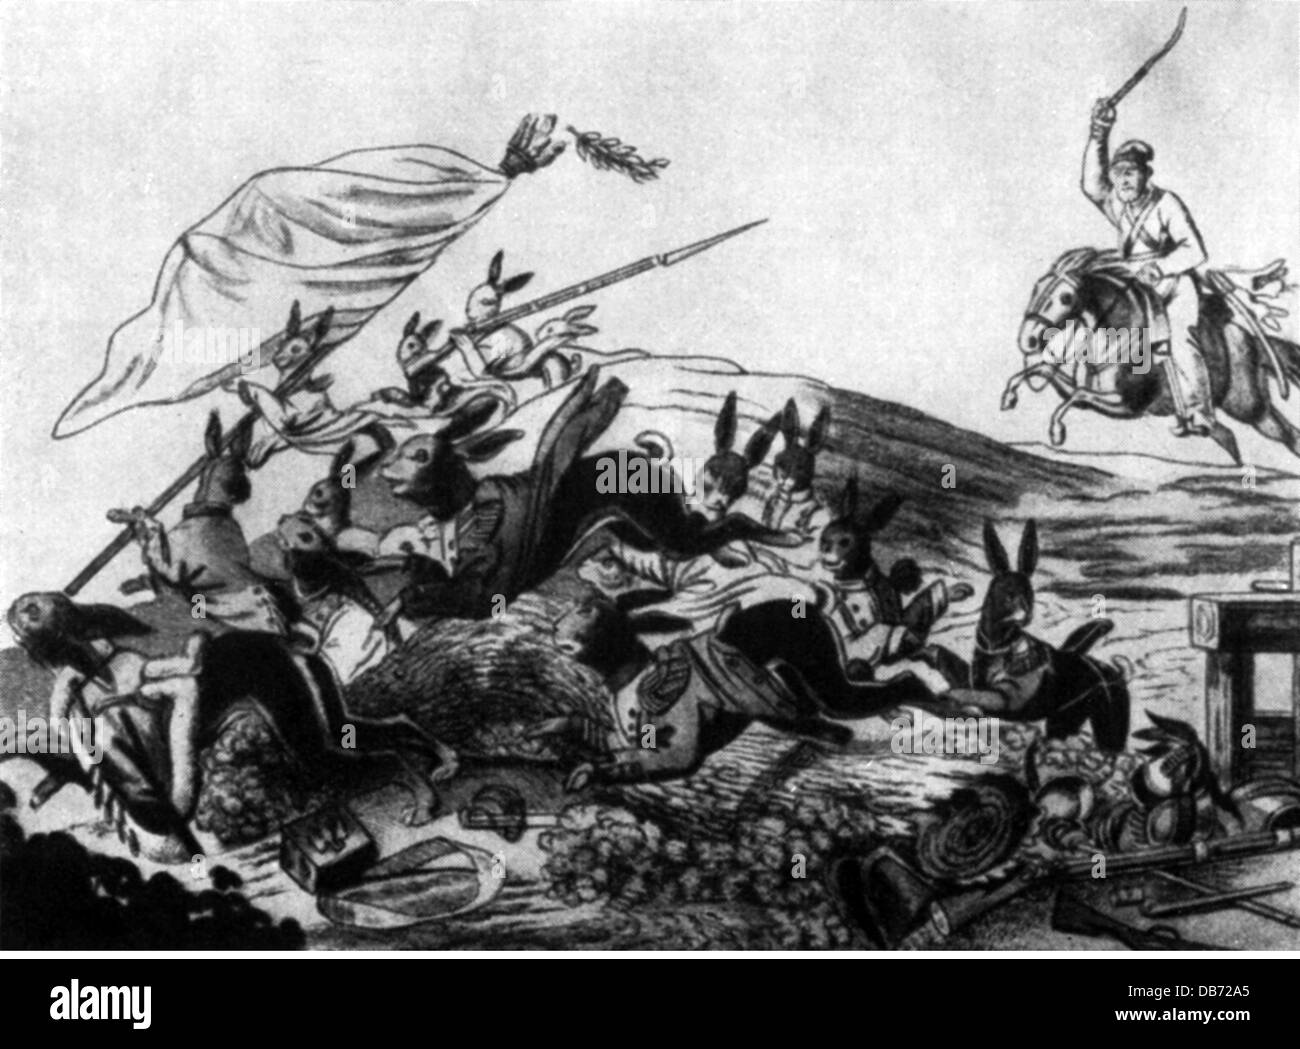 events, War of the Sixth Coalition 1812 - 1814, Russian campaign 1812, retreat of the French Grande Armee, caricature, French rabbits fleeing from a Russian cossack, flight, skedaddle, Russia, France, defeat, Napoleonic Wars, satire, 19th century, historic, historical, people, Additional-Rights-Clearences-Not Available Stock Photo